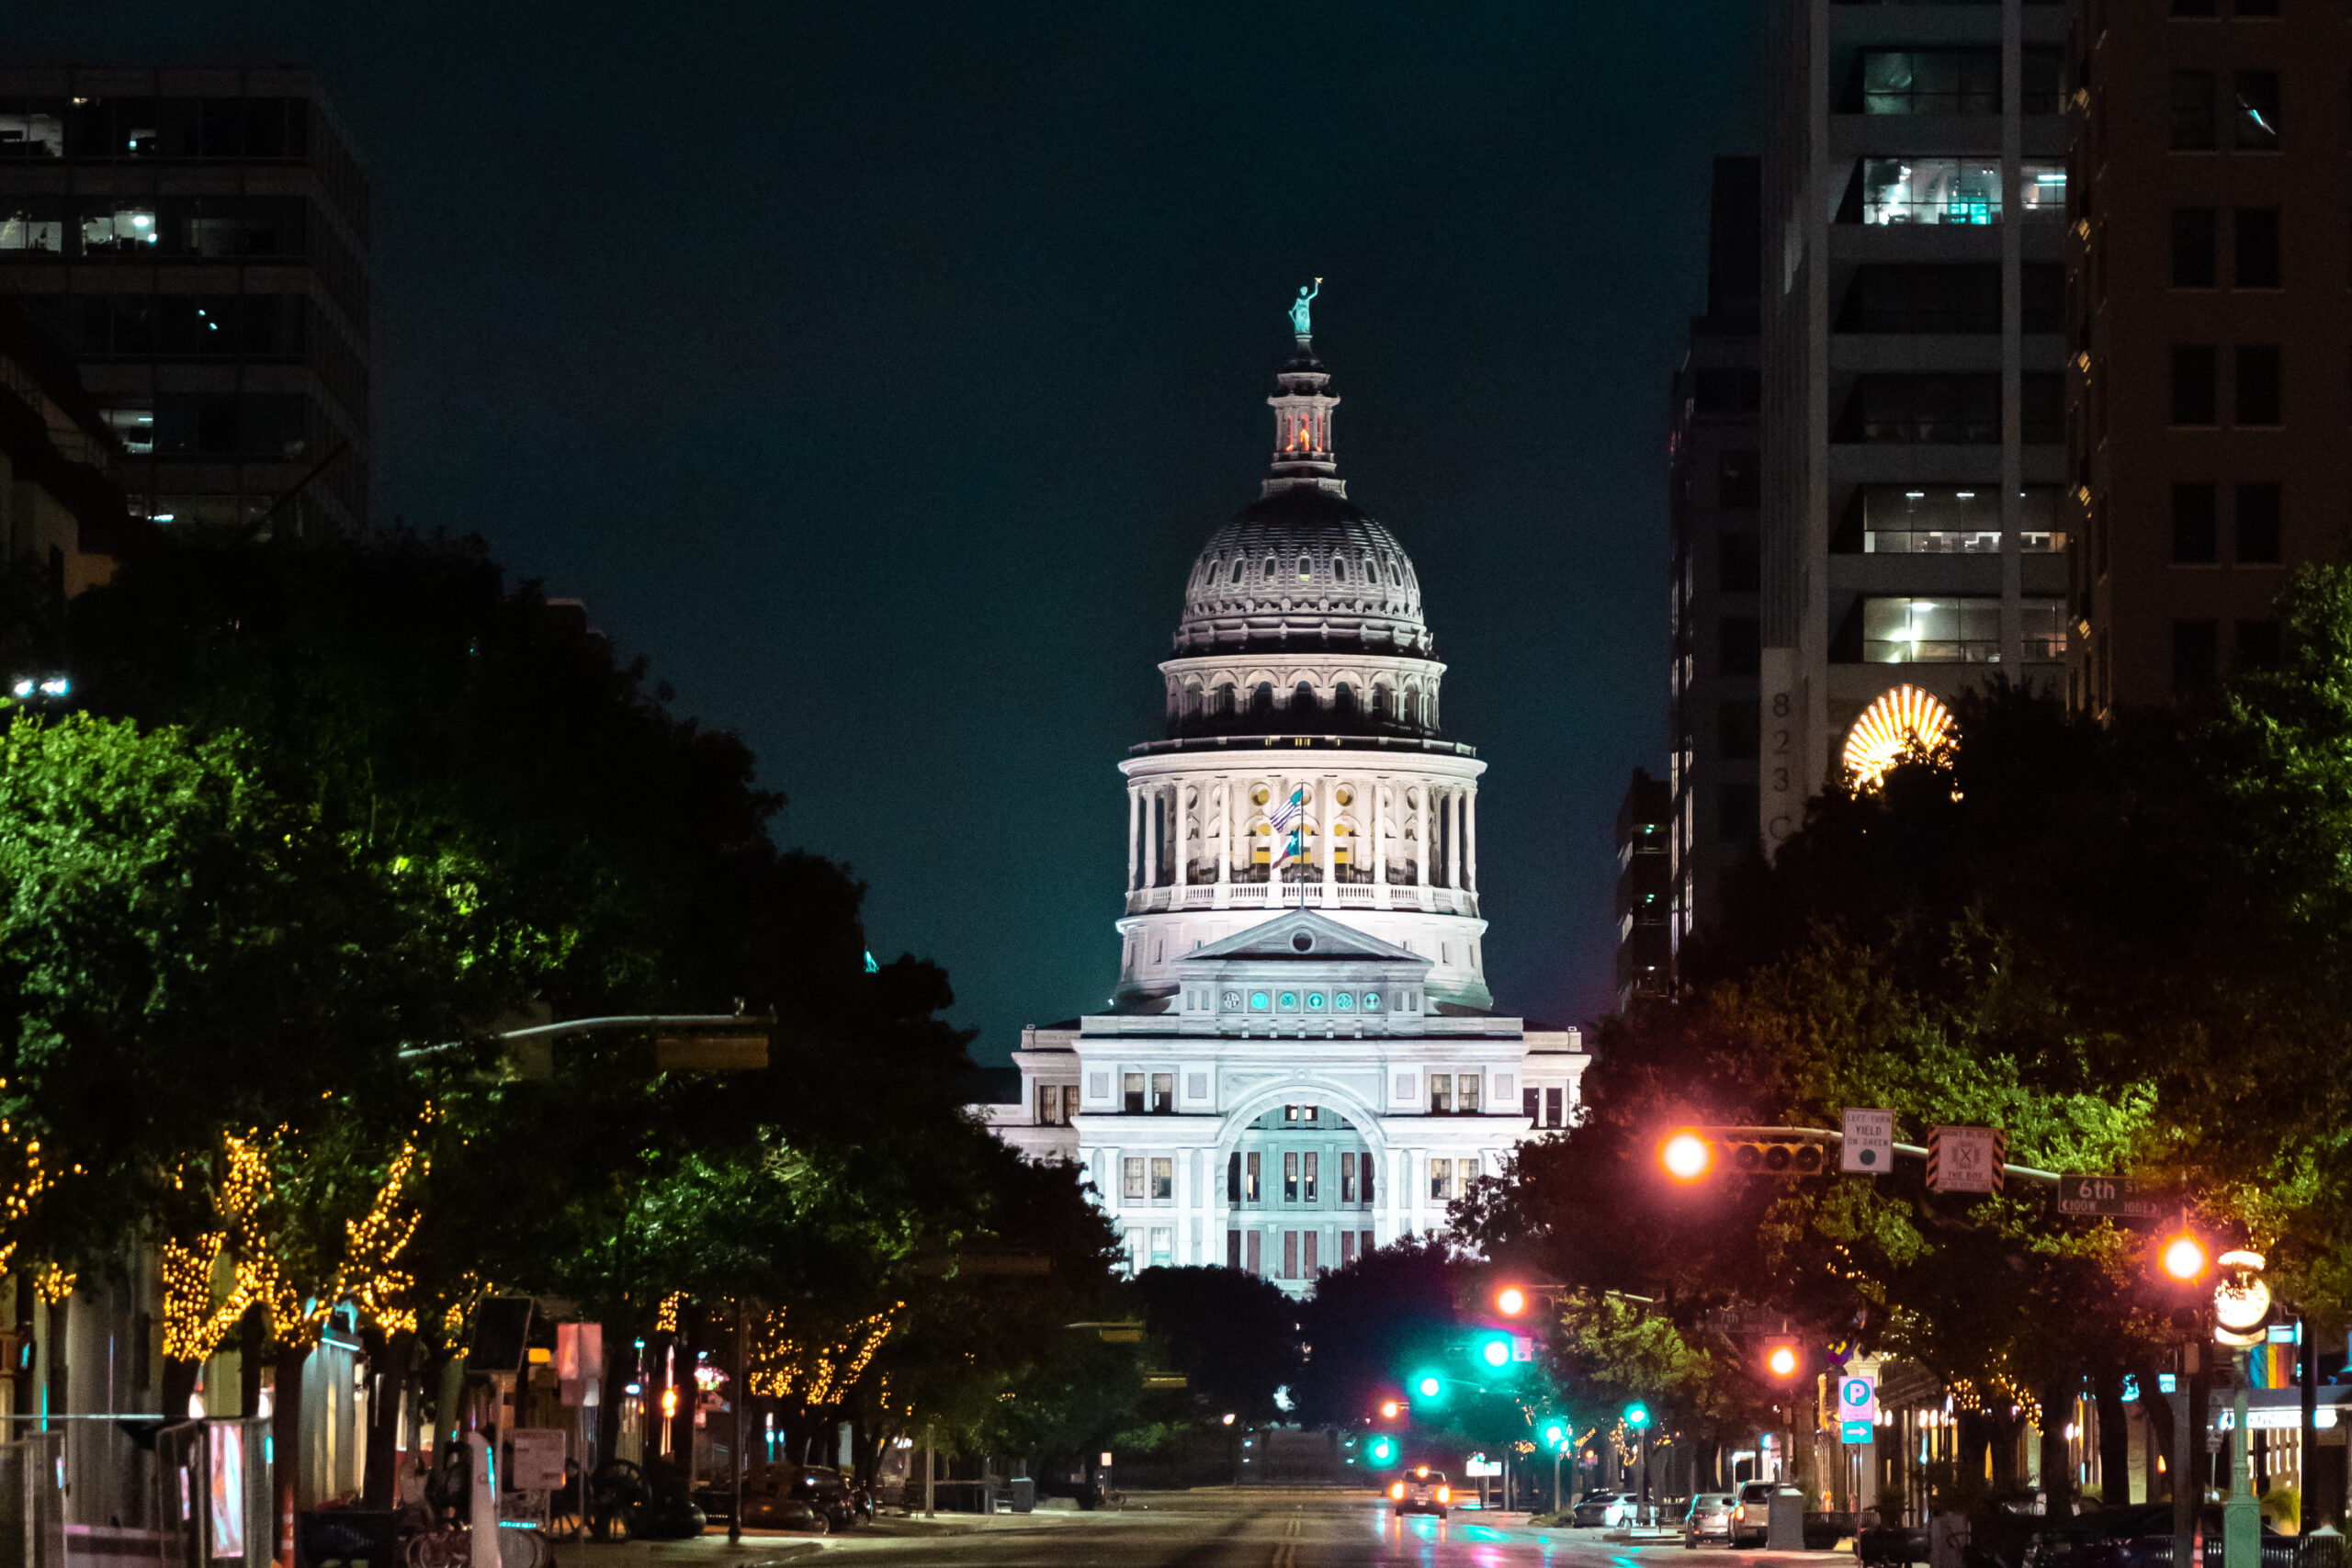 Texas State Capitol Building at night